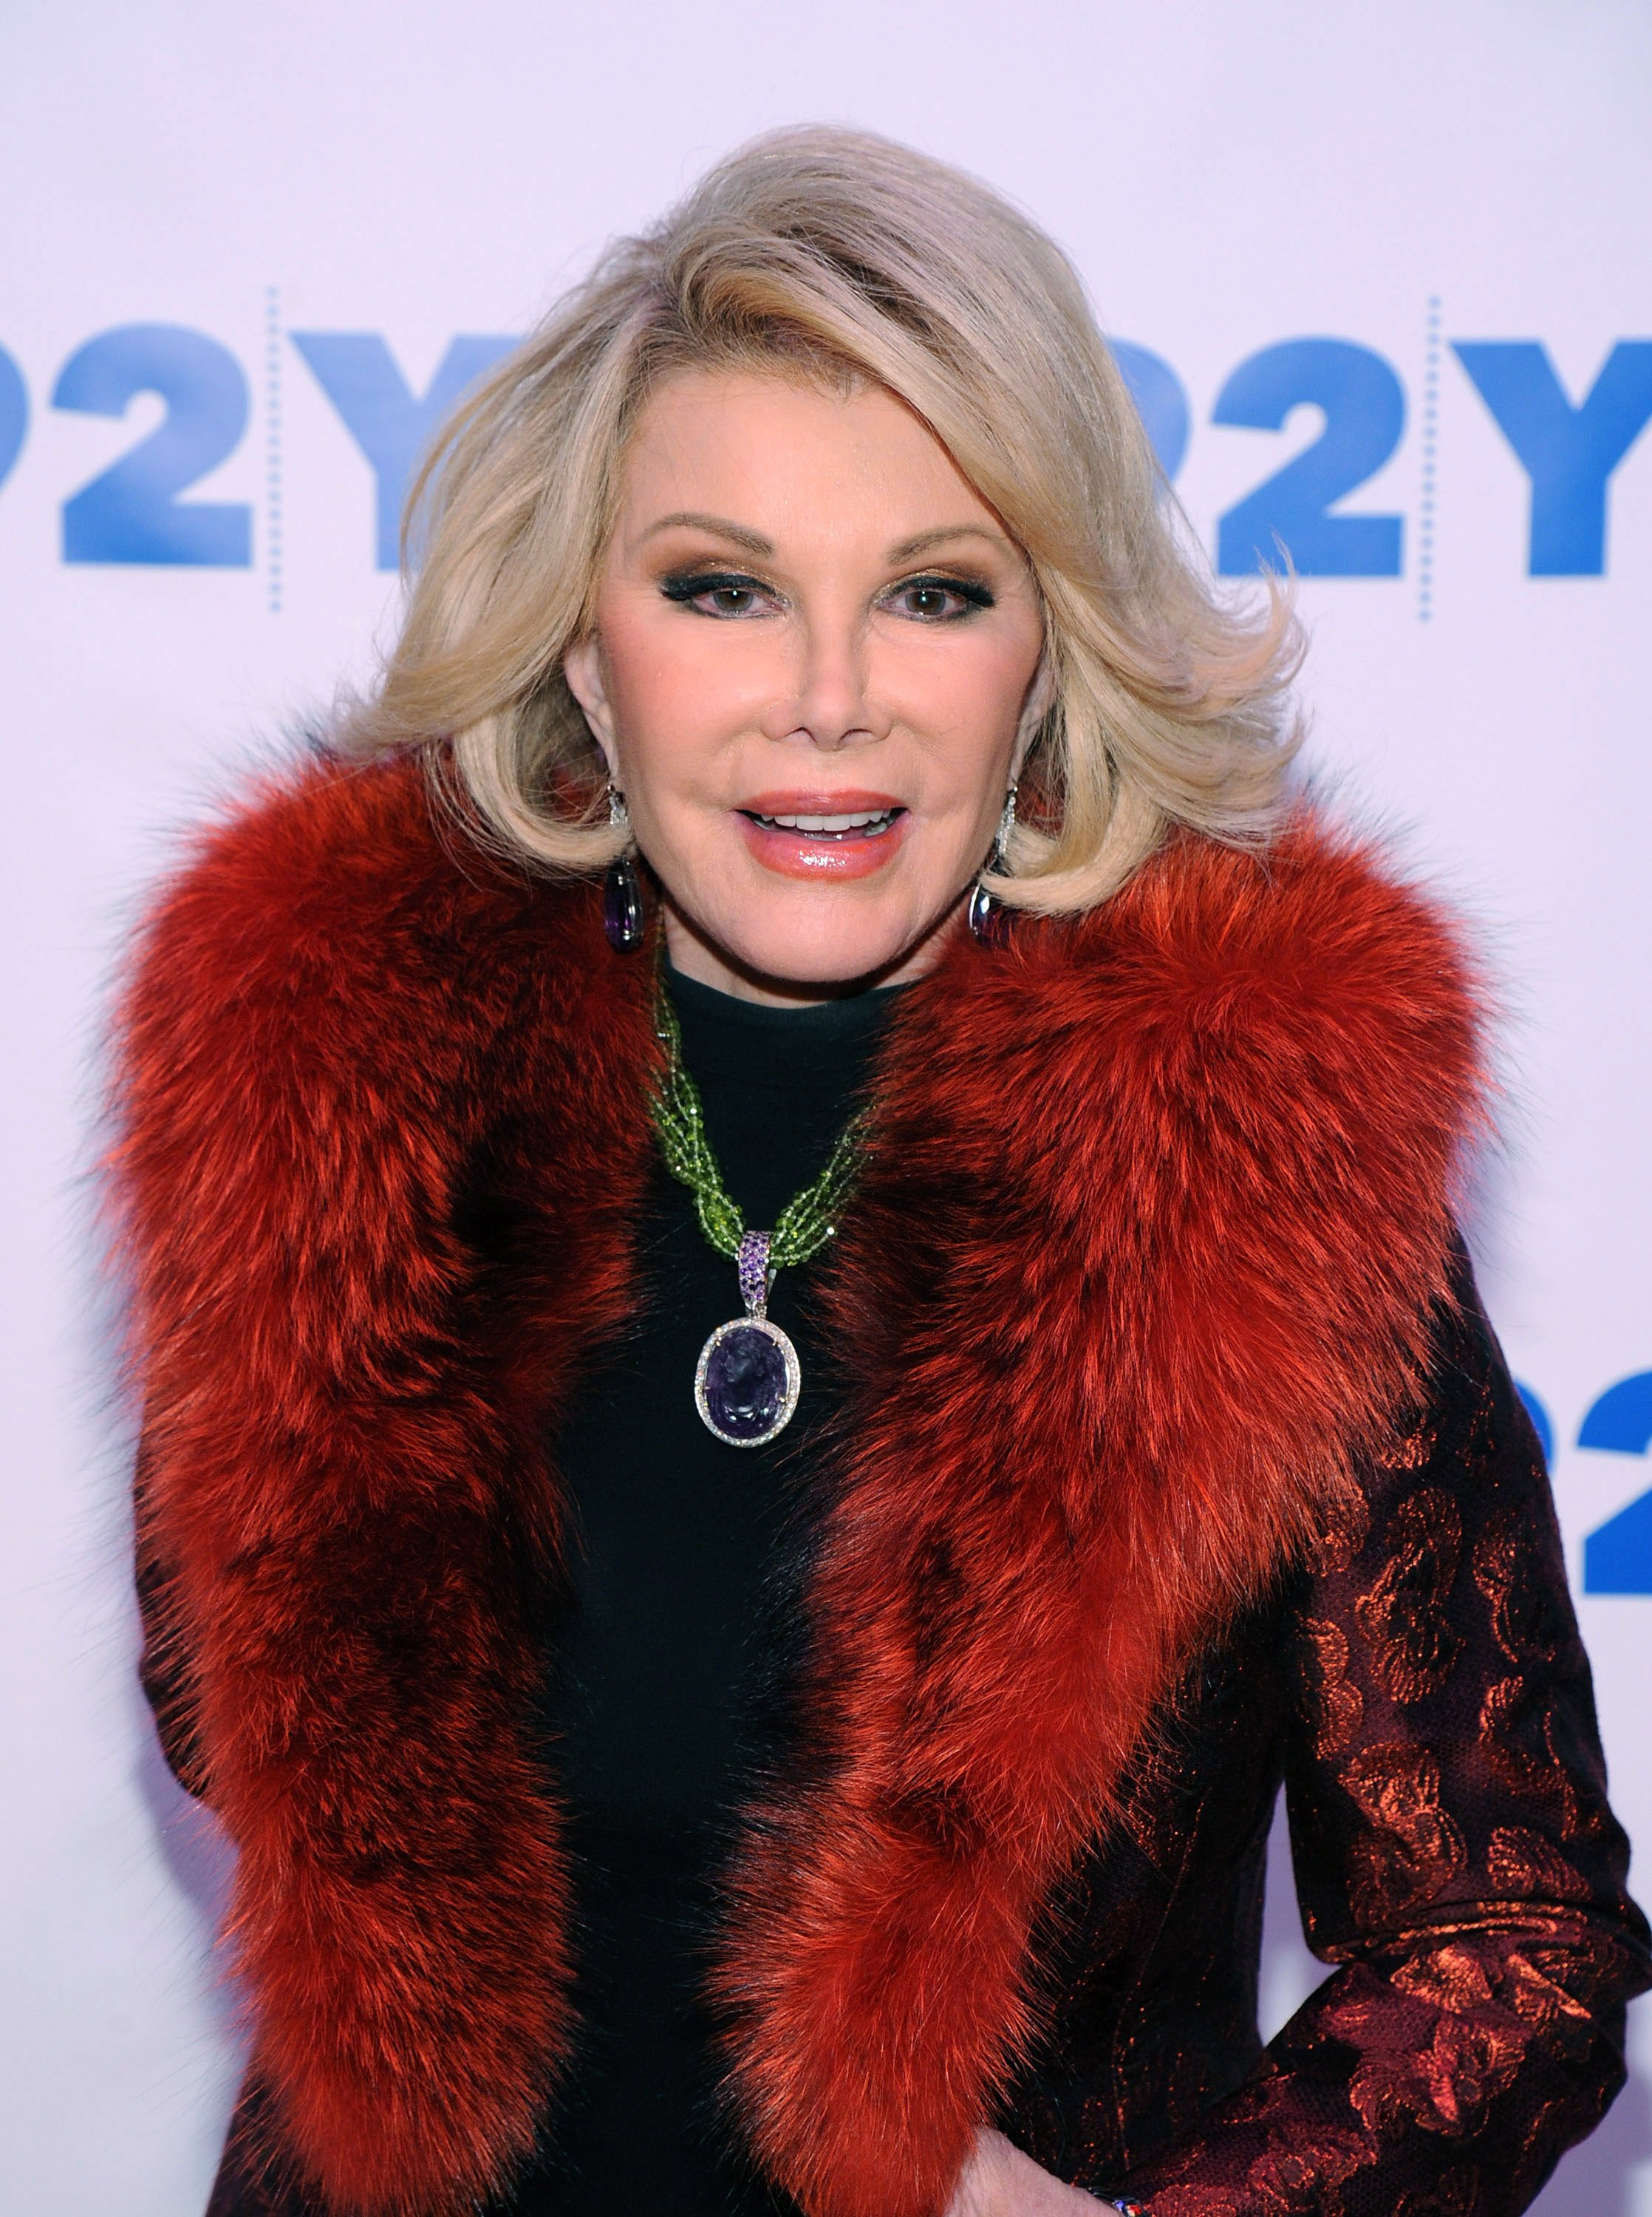 Joan Rivers attends An Evening with Joan and Melissa Rivers in New York City on January 22, 2014 | Photo: Getty Images